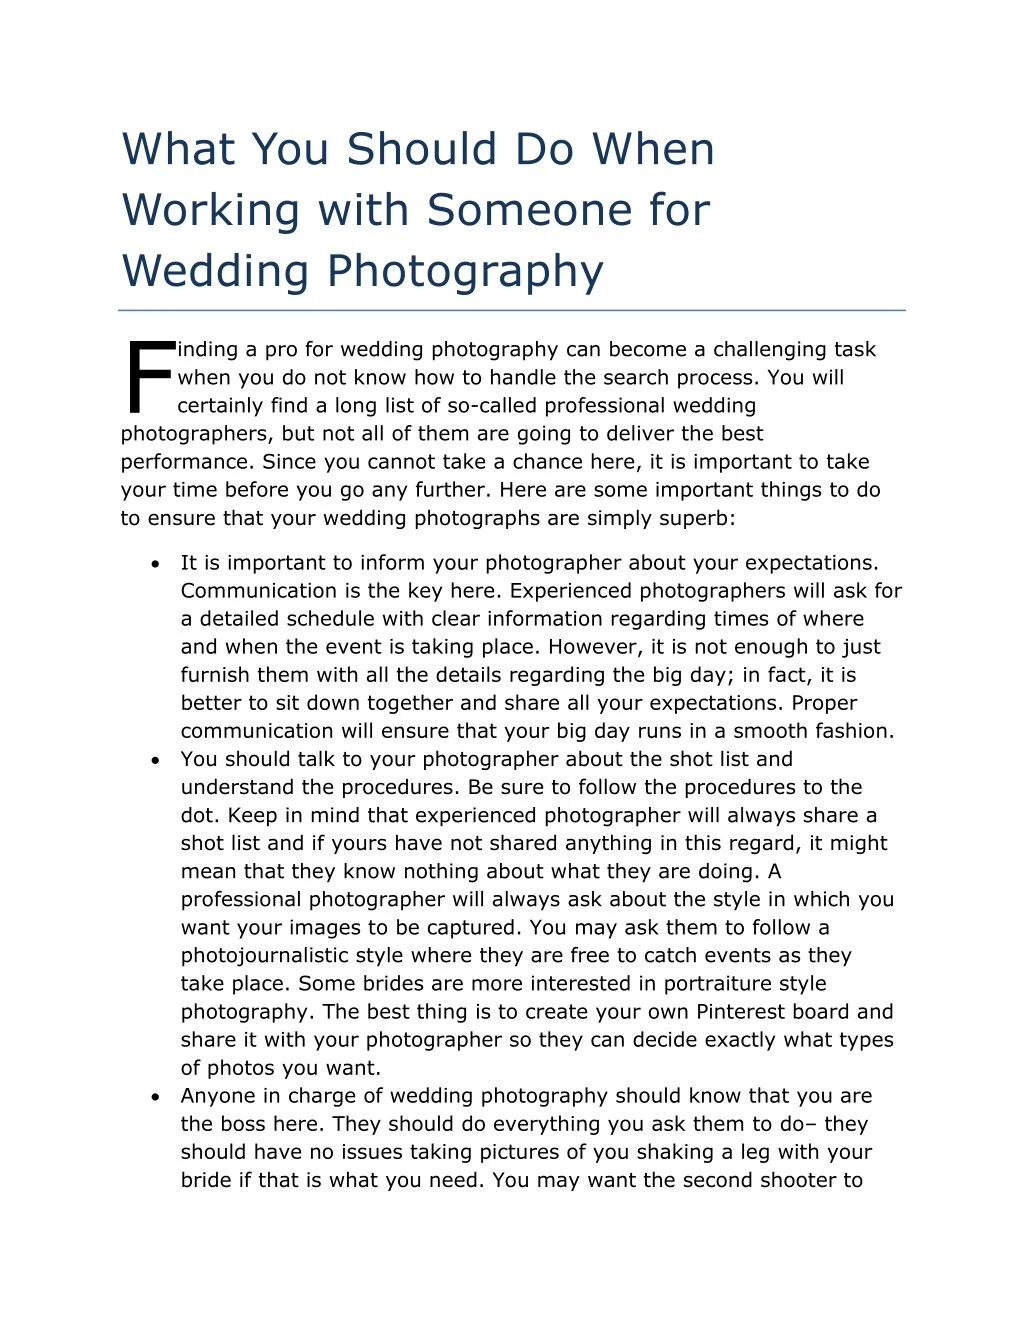 what you should do when working with someone